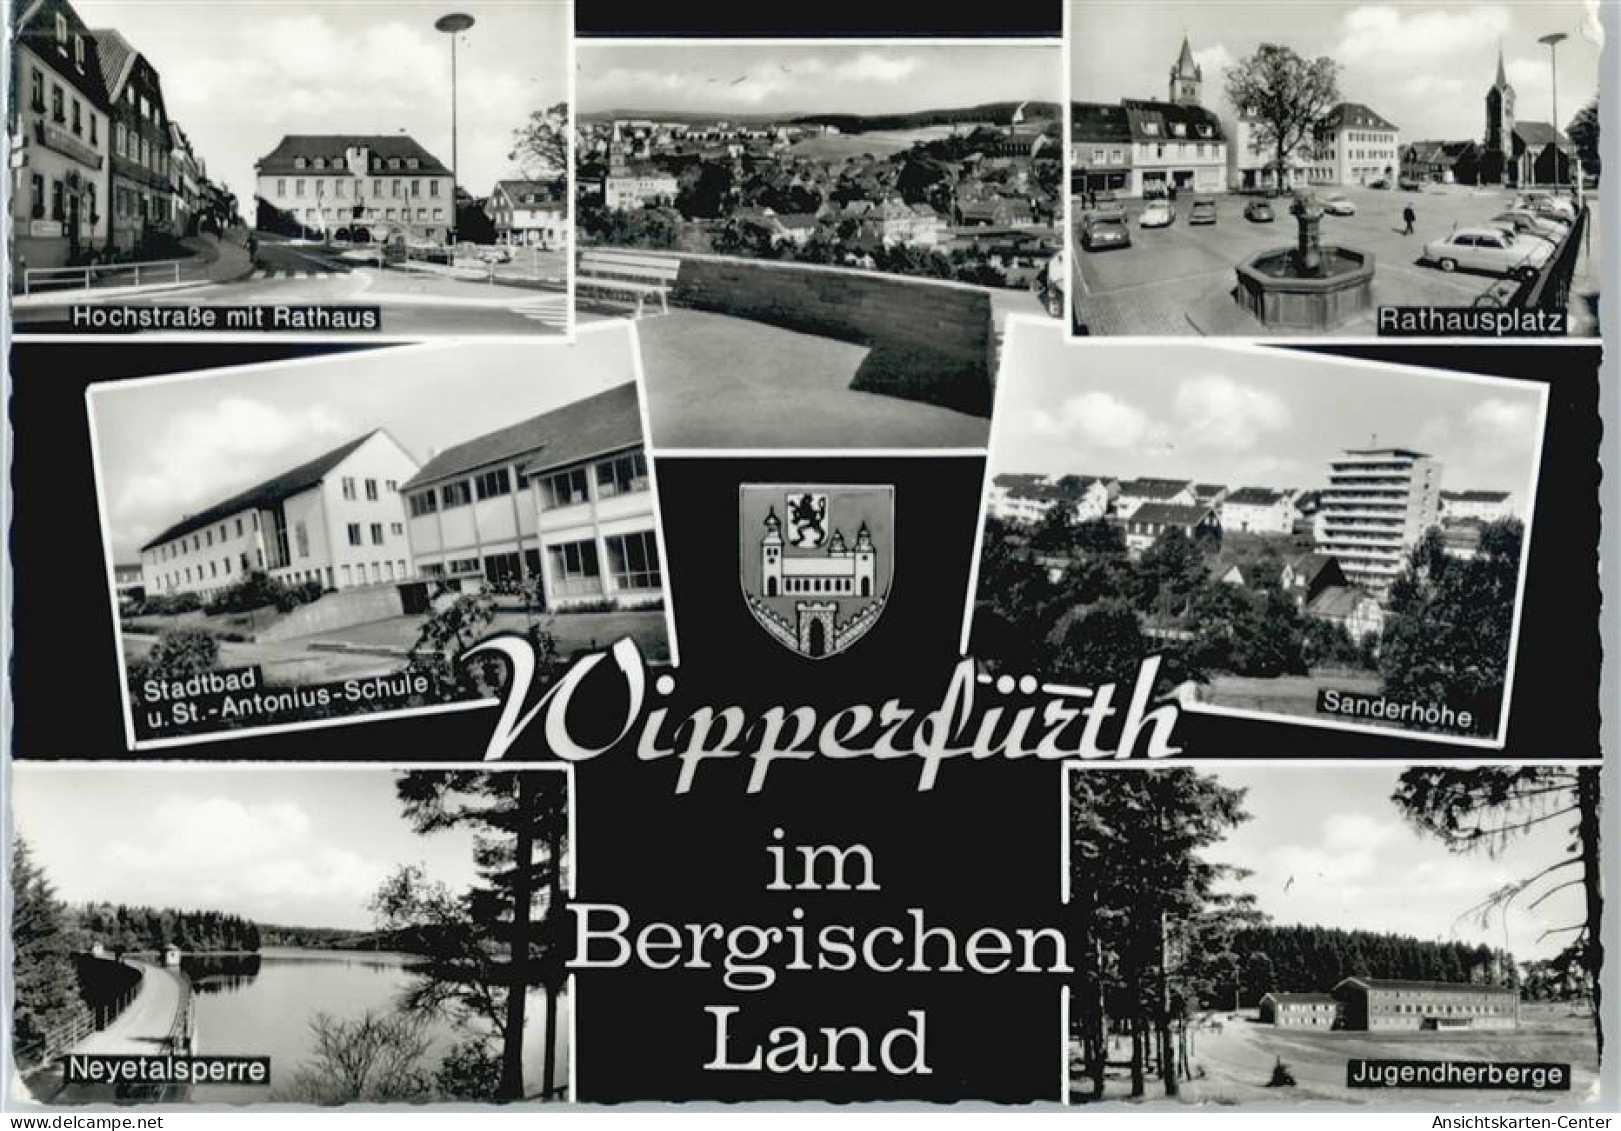 50544601 - Wipperfuerth - Wipperfuerth